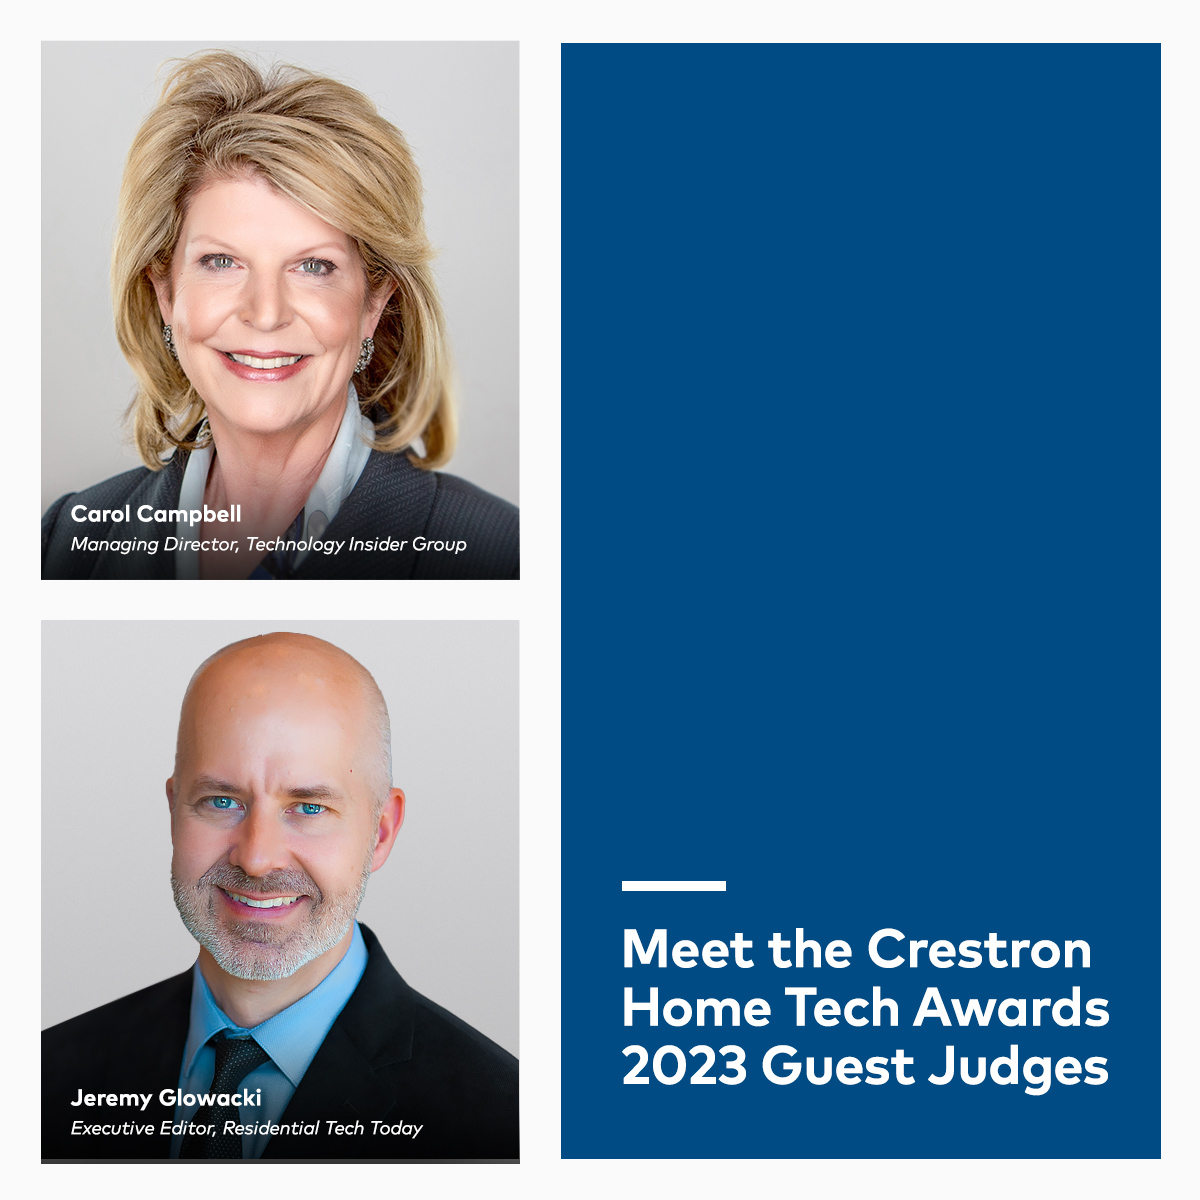 Crestron Announces New Judges for Home Technology Awards